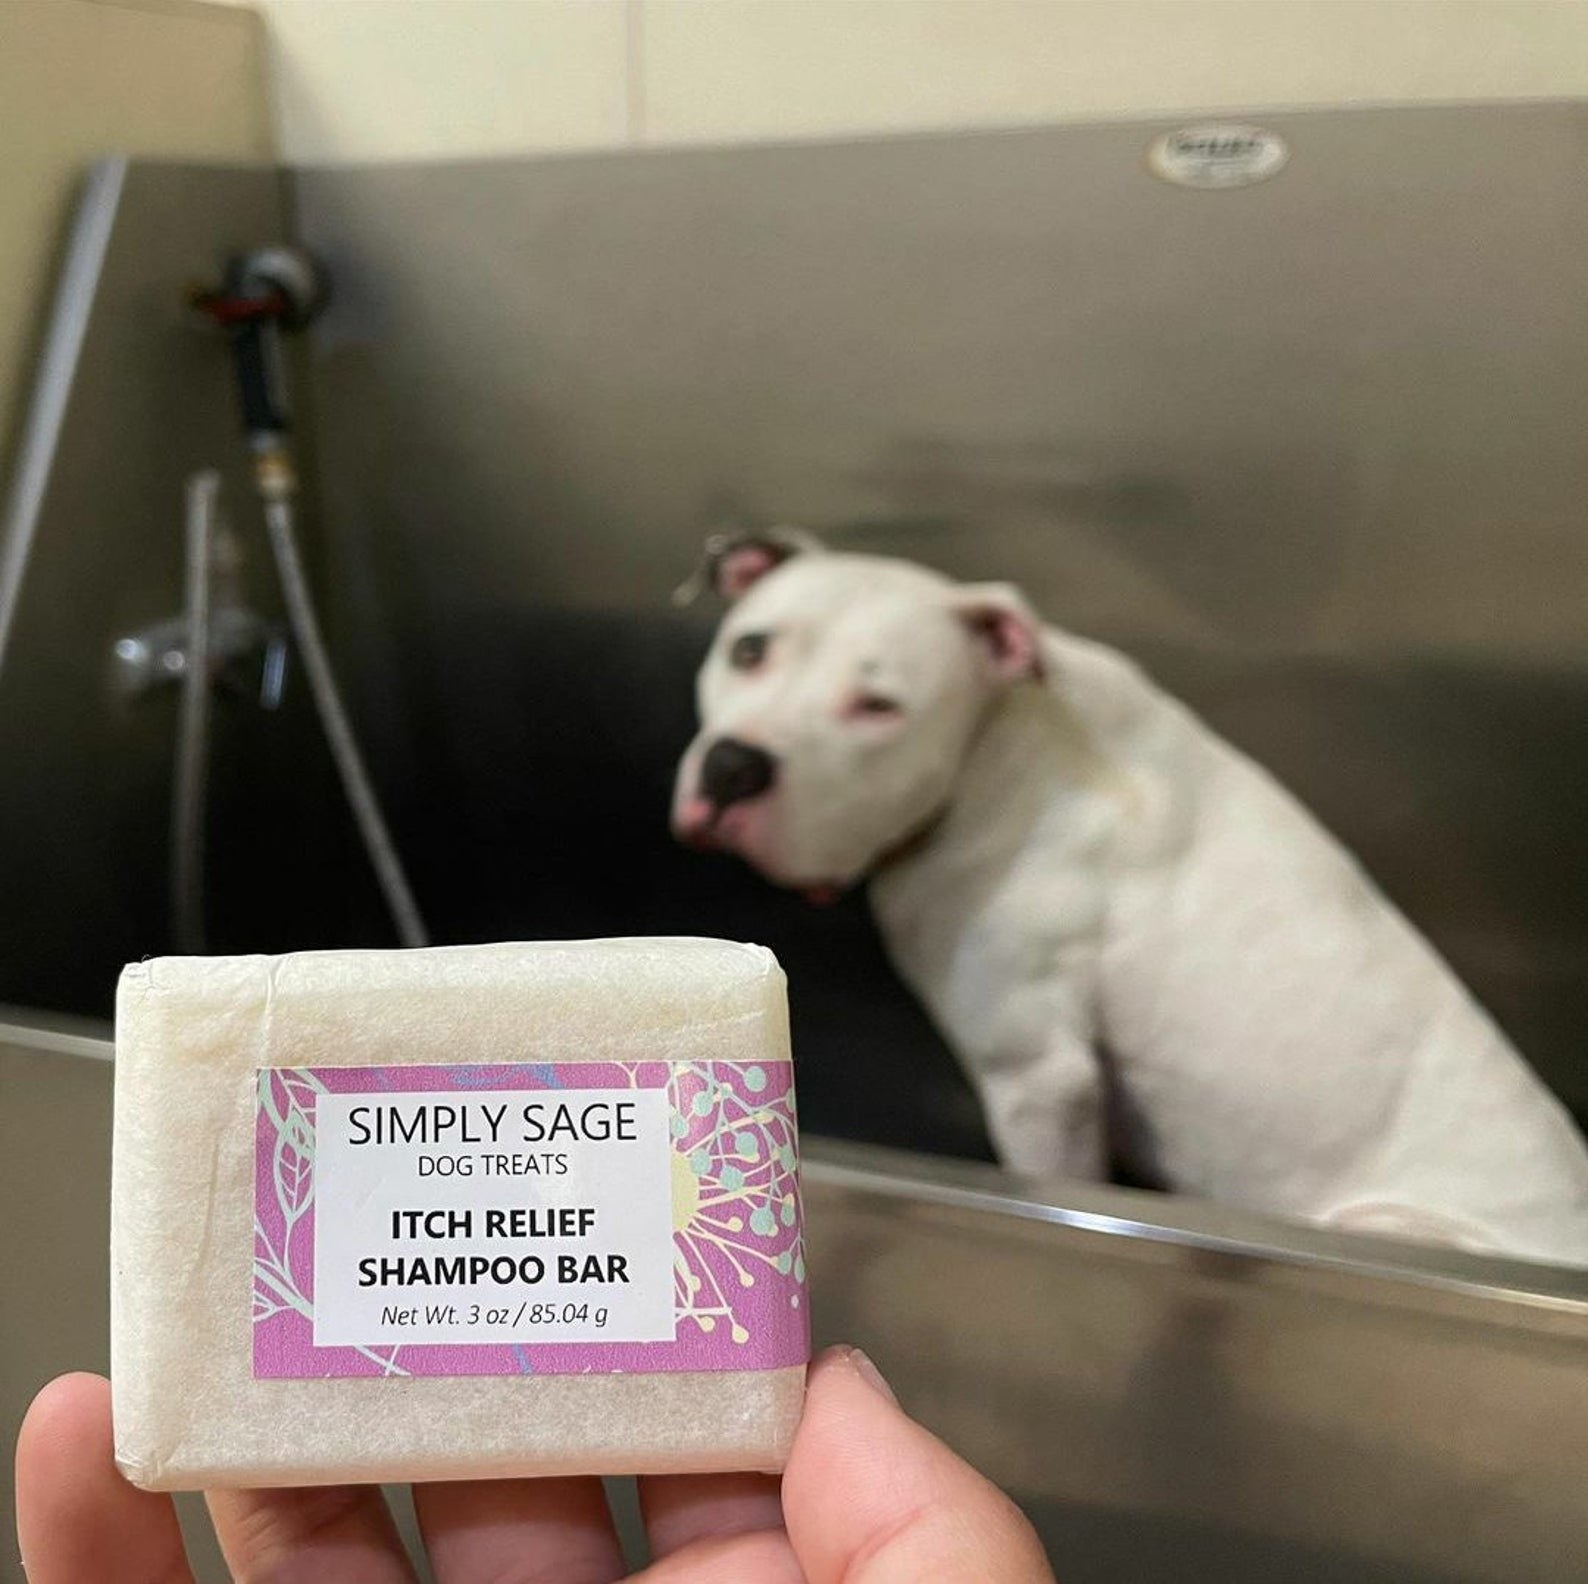 A person holding the shampoo bar in front of a dog in a basin